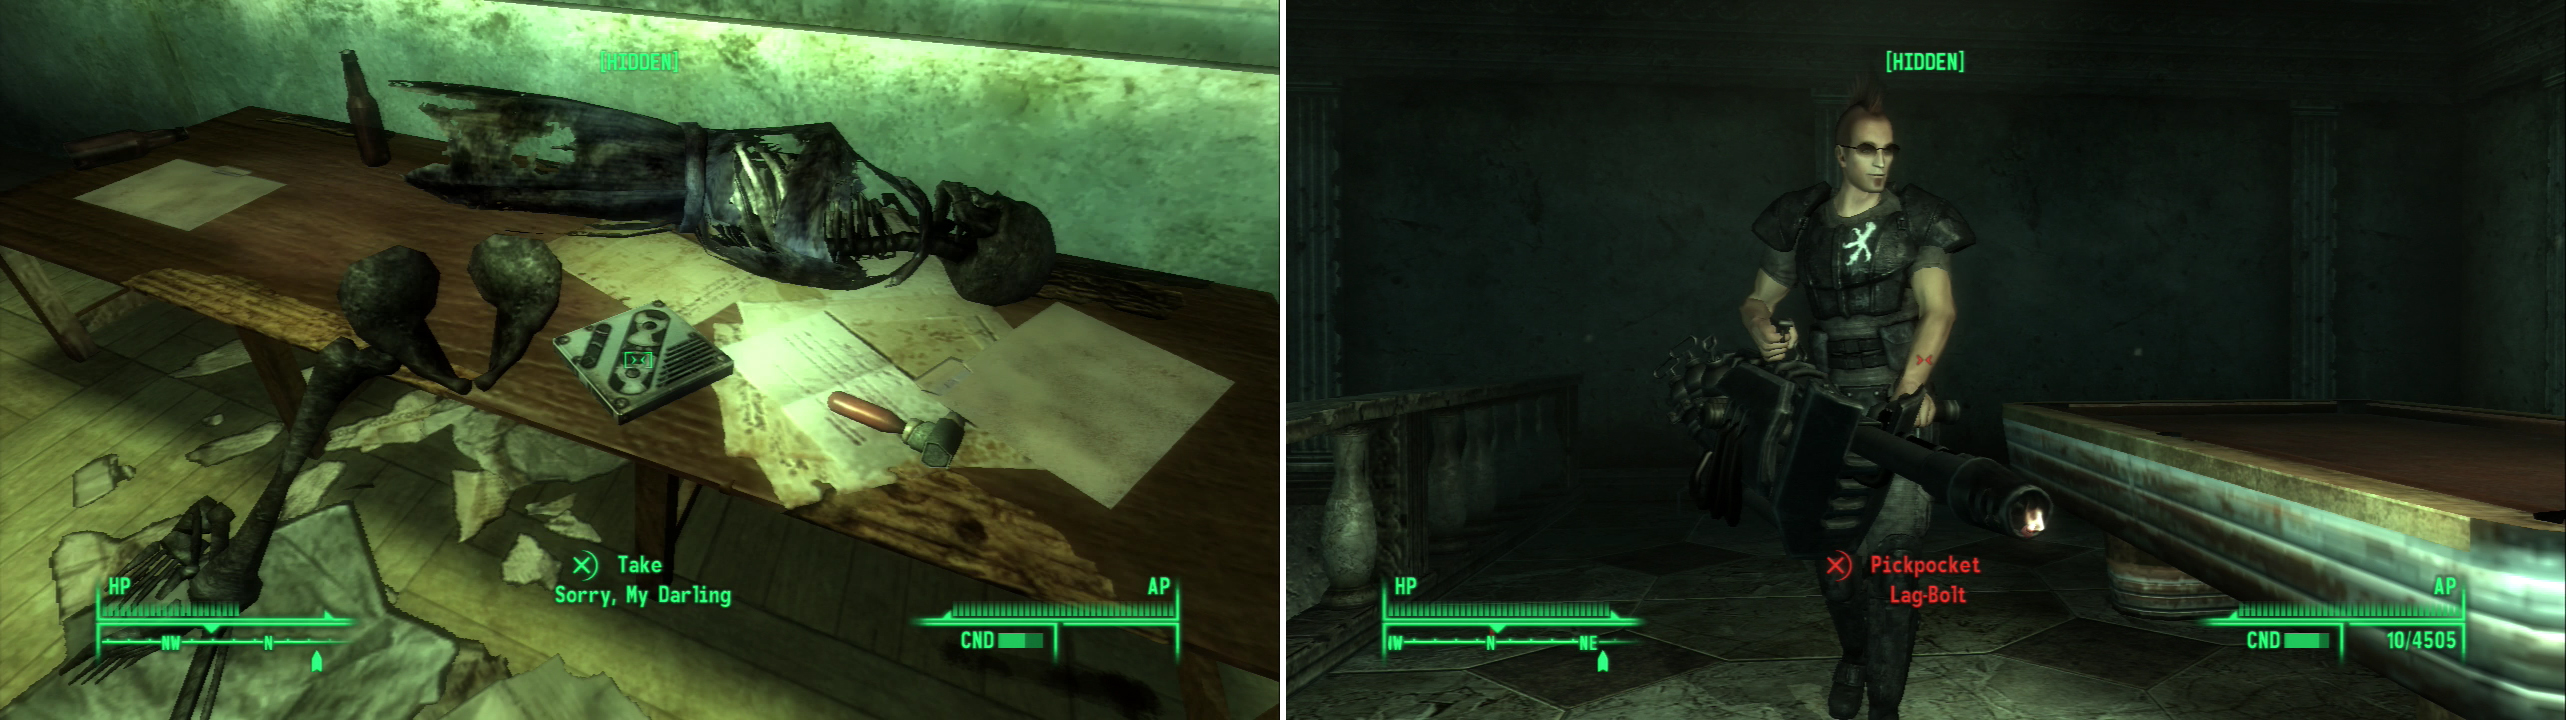 Pick up the note “Sorry, My Darlin” (left) then head to the La Maison Beauregard Lobby to find Lag-Bolt (right).